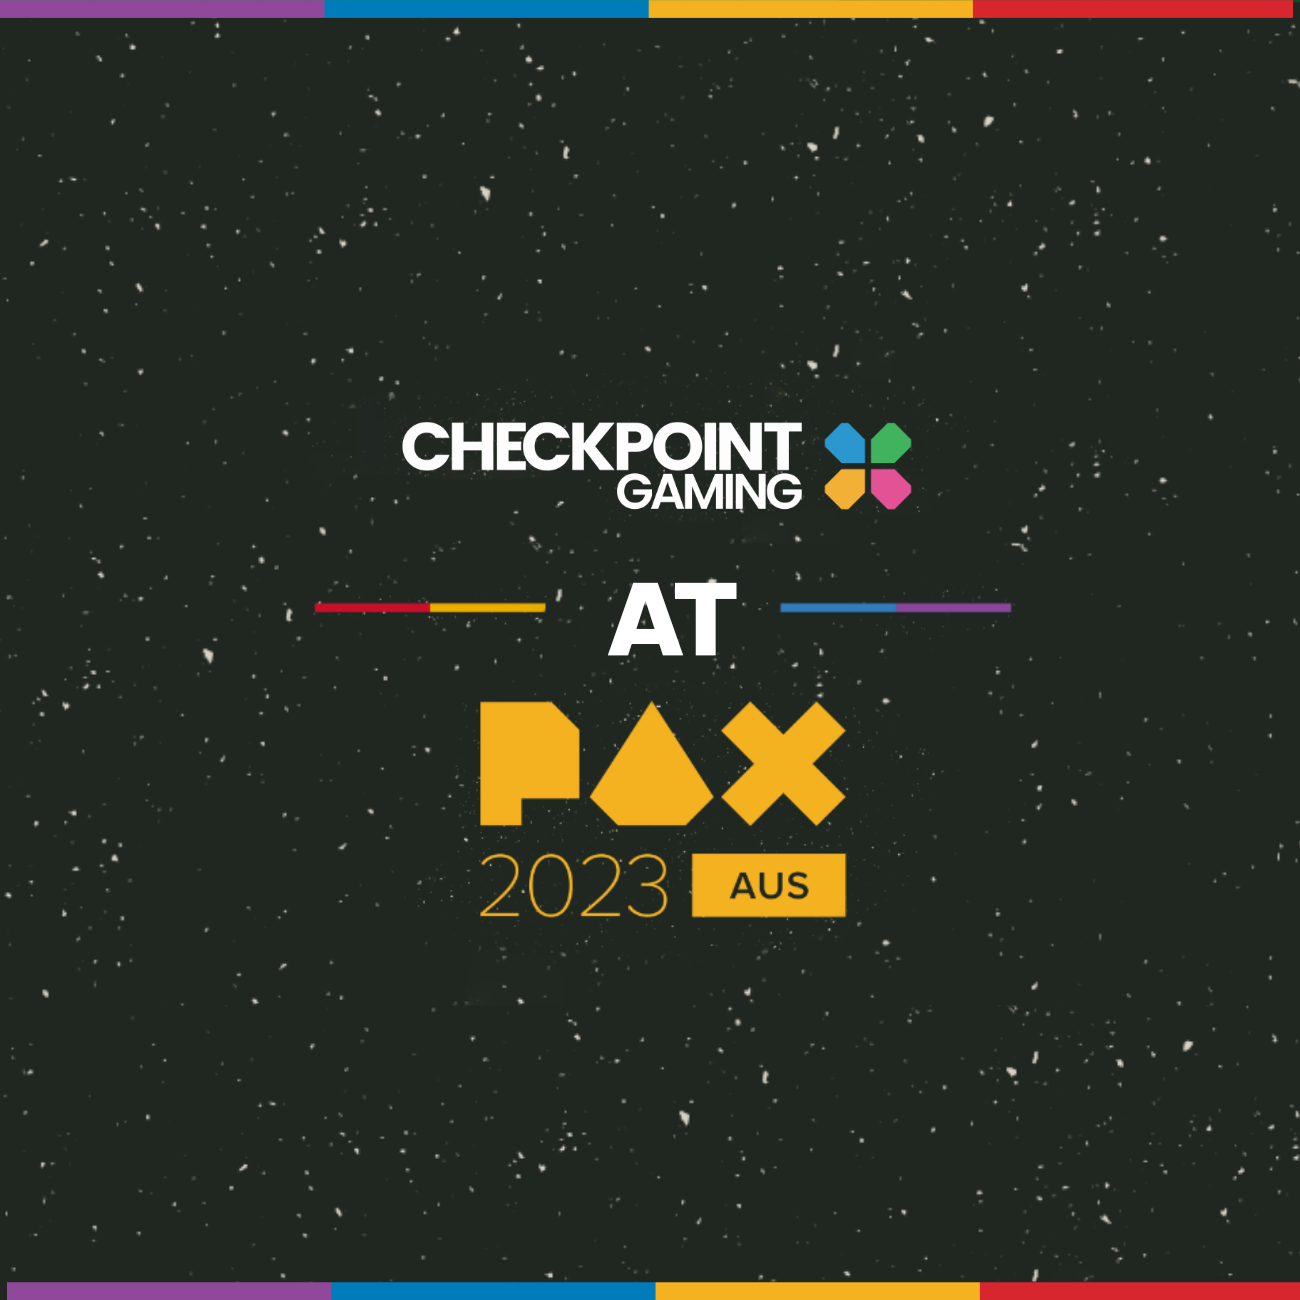 Checkpoint Gaming hits PAX Aus 2023!